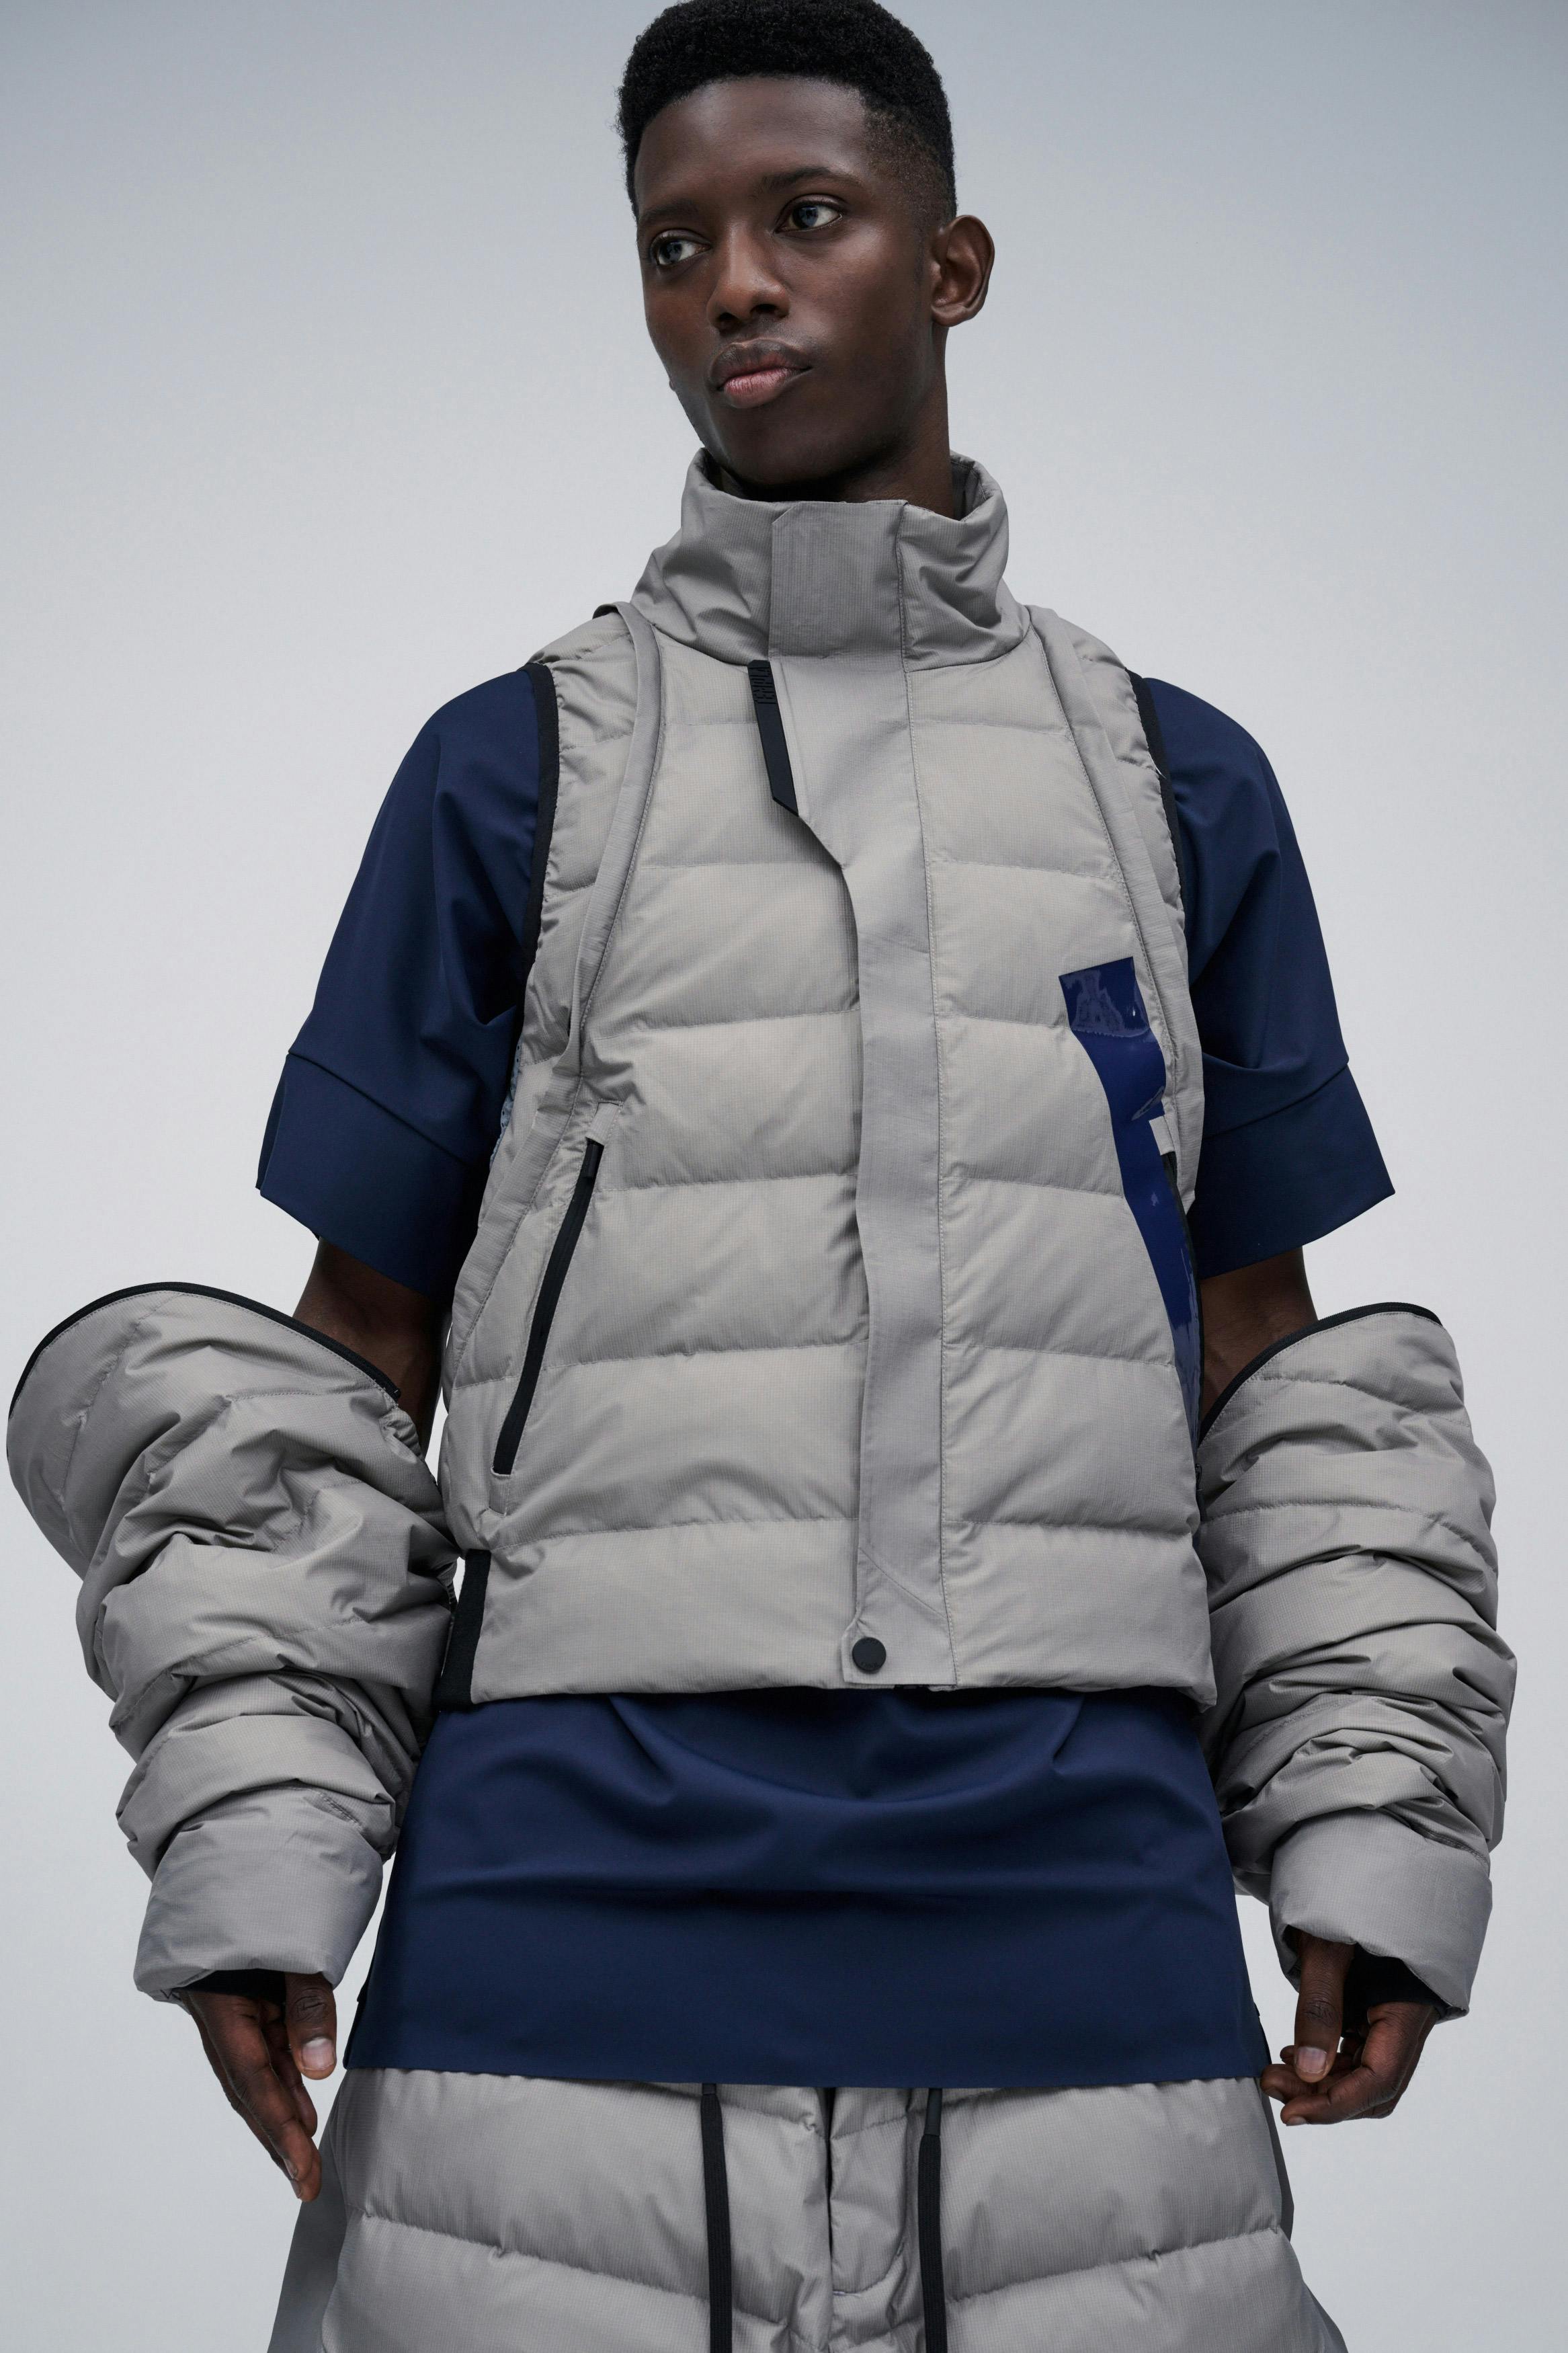 Templa - man wearing ski jacket for skiware fashion photo shoot for lempriere wells